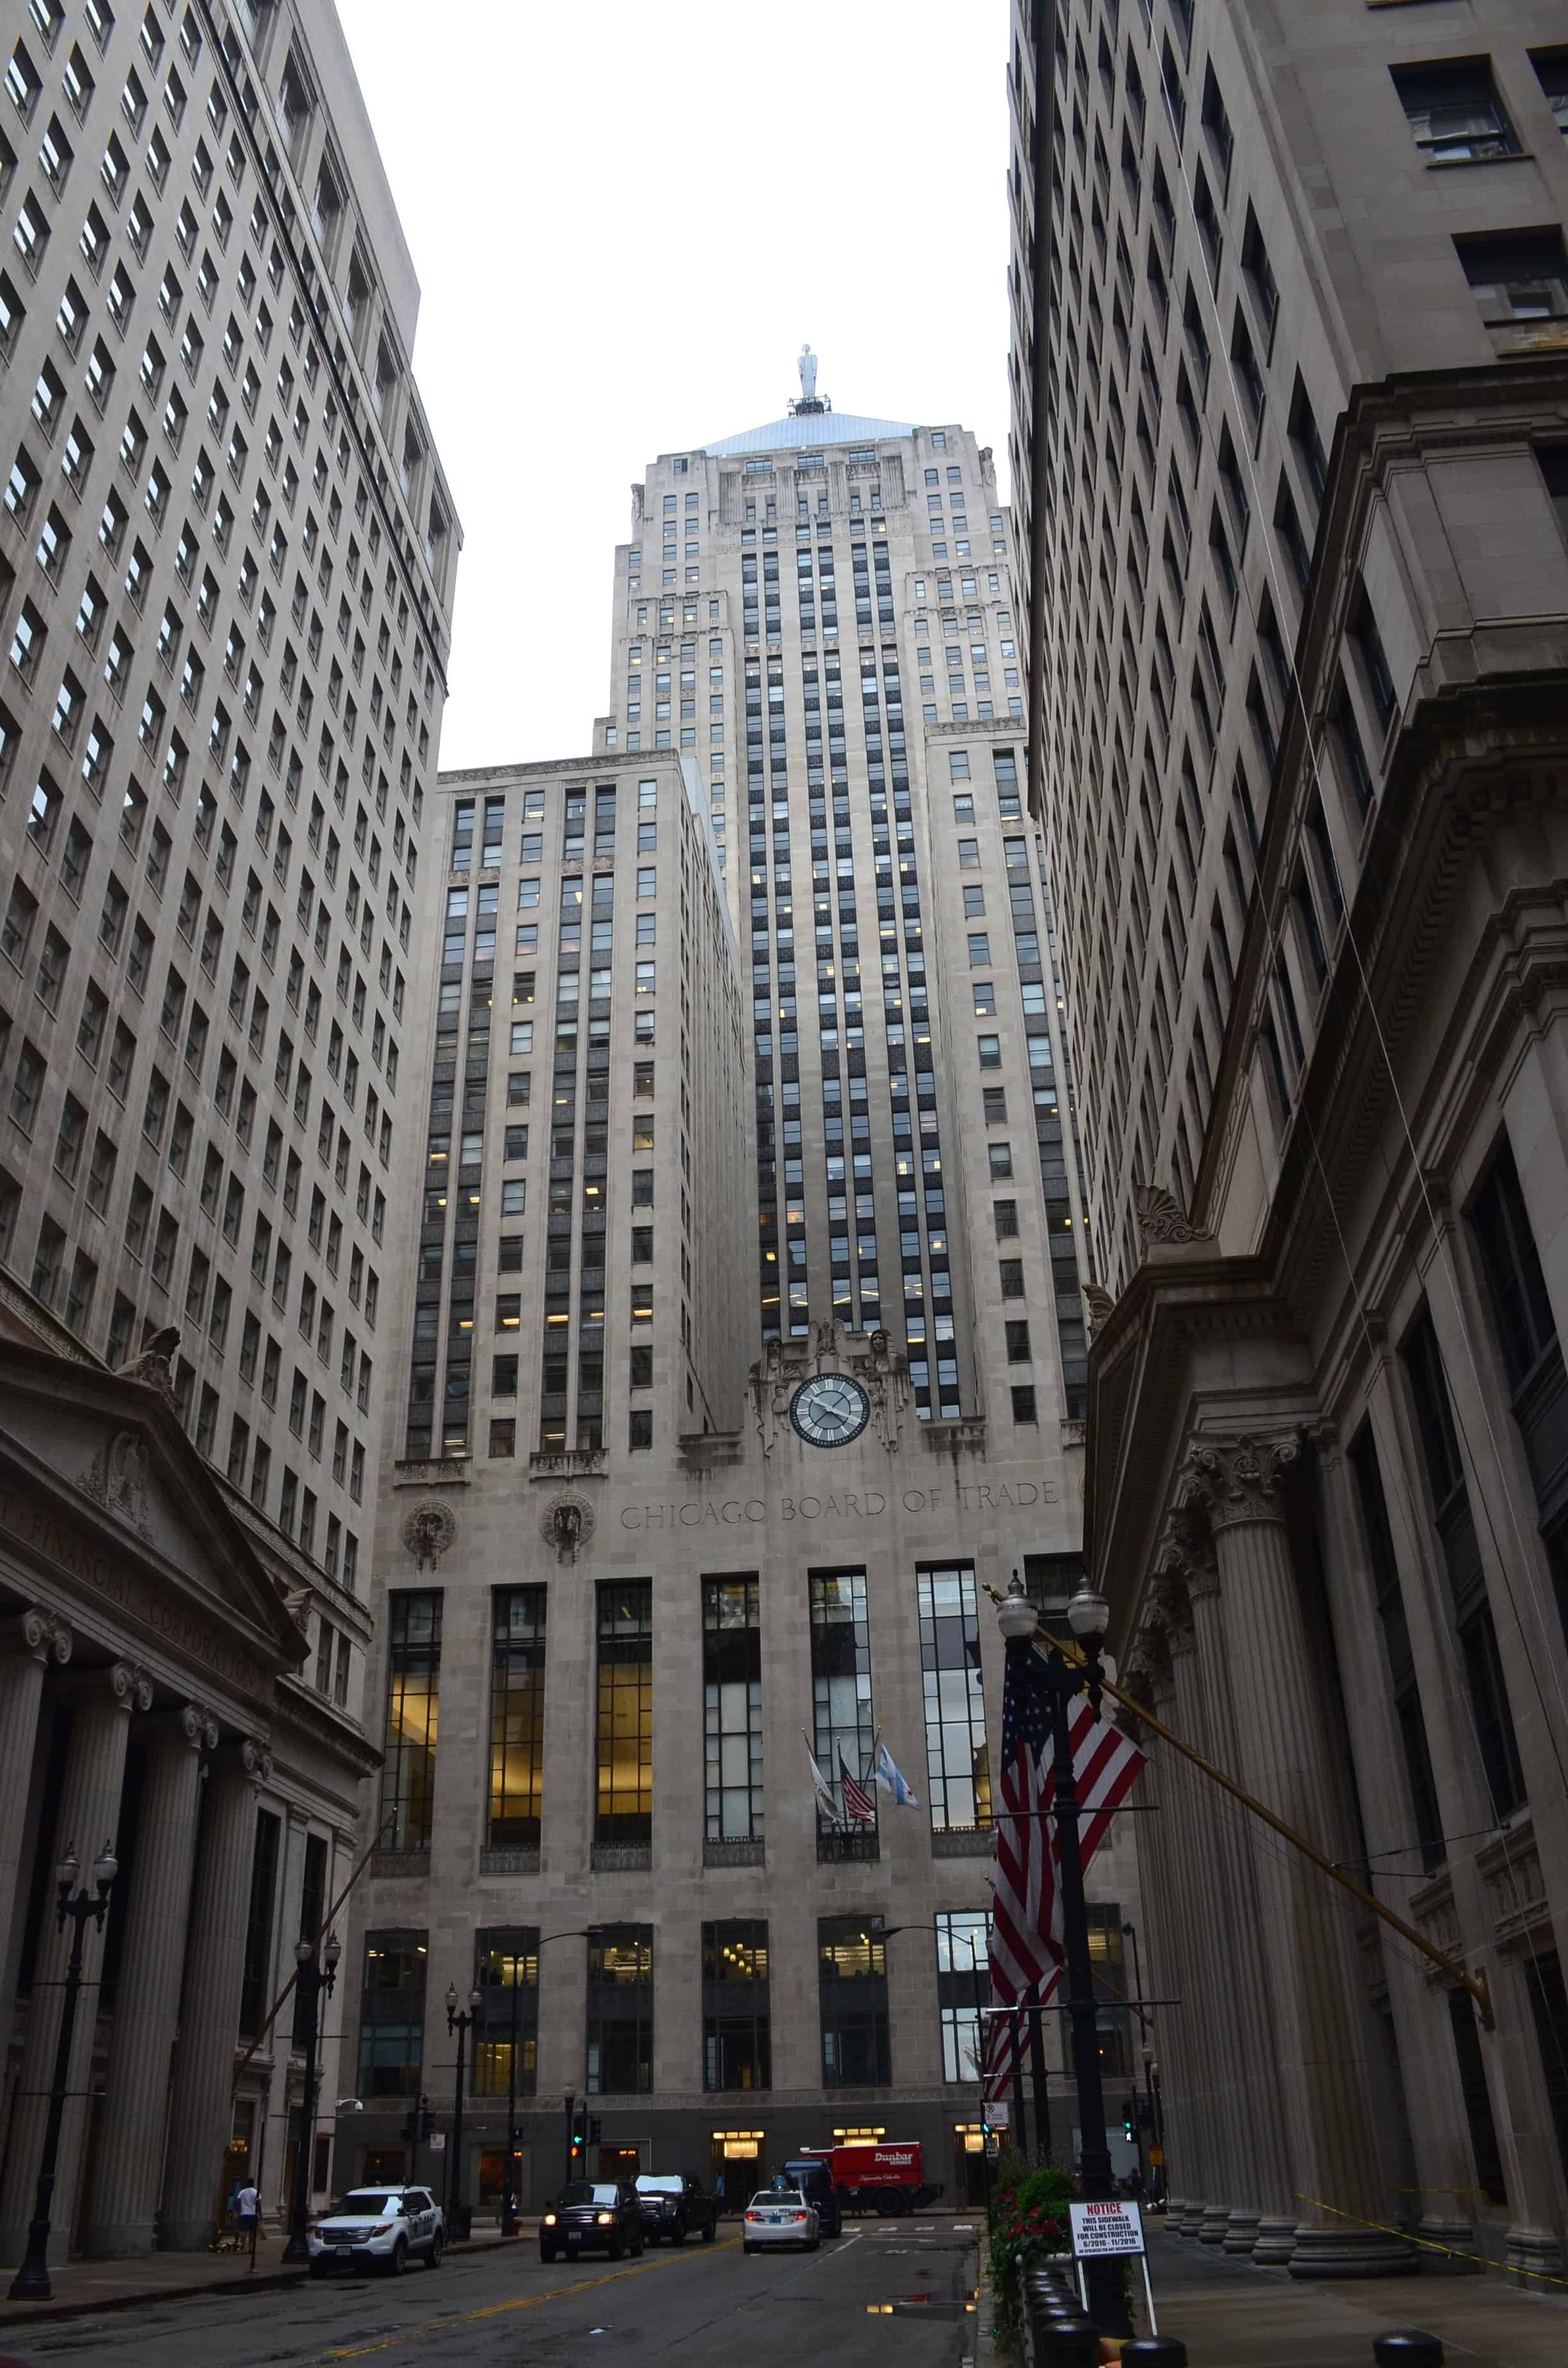 Chicago Board of Trade Building in Chicago, Illinois